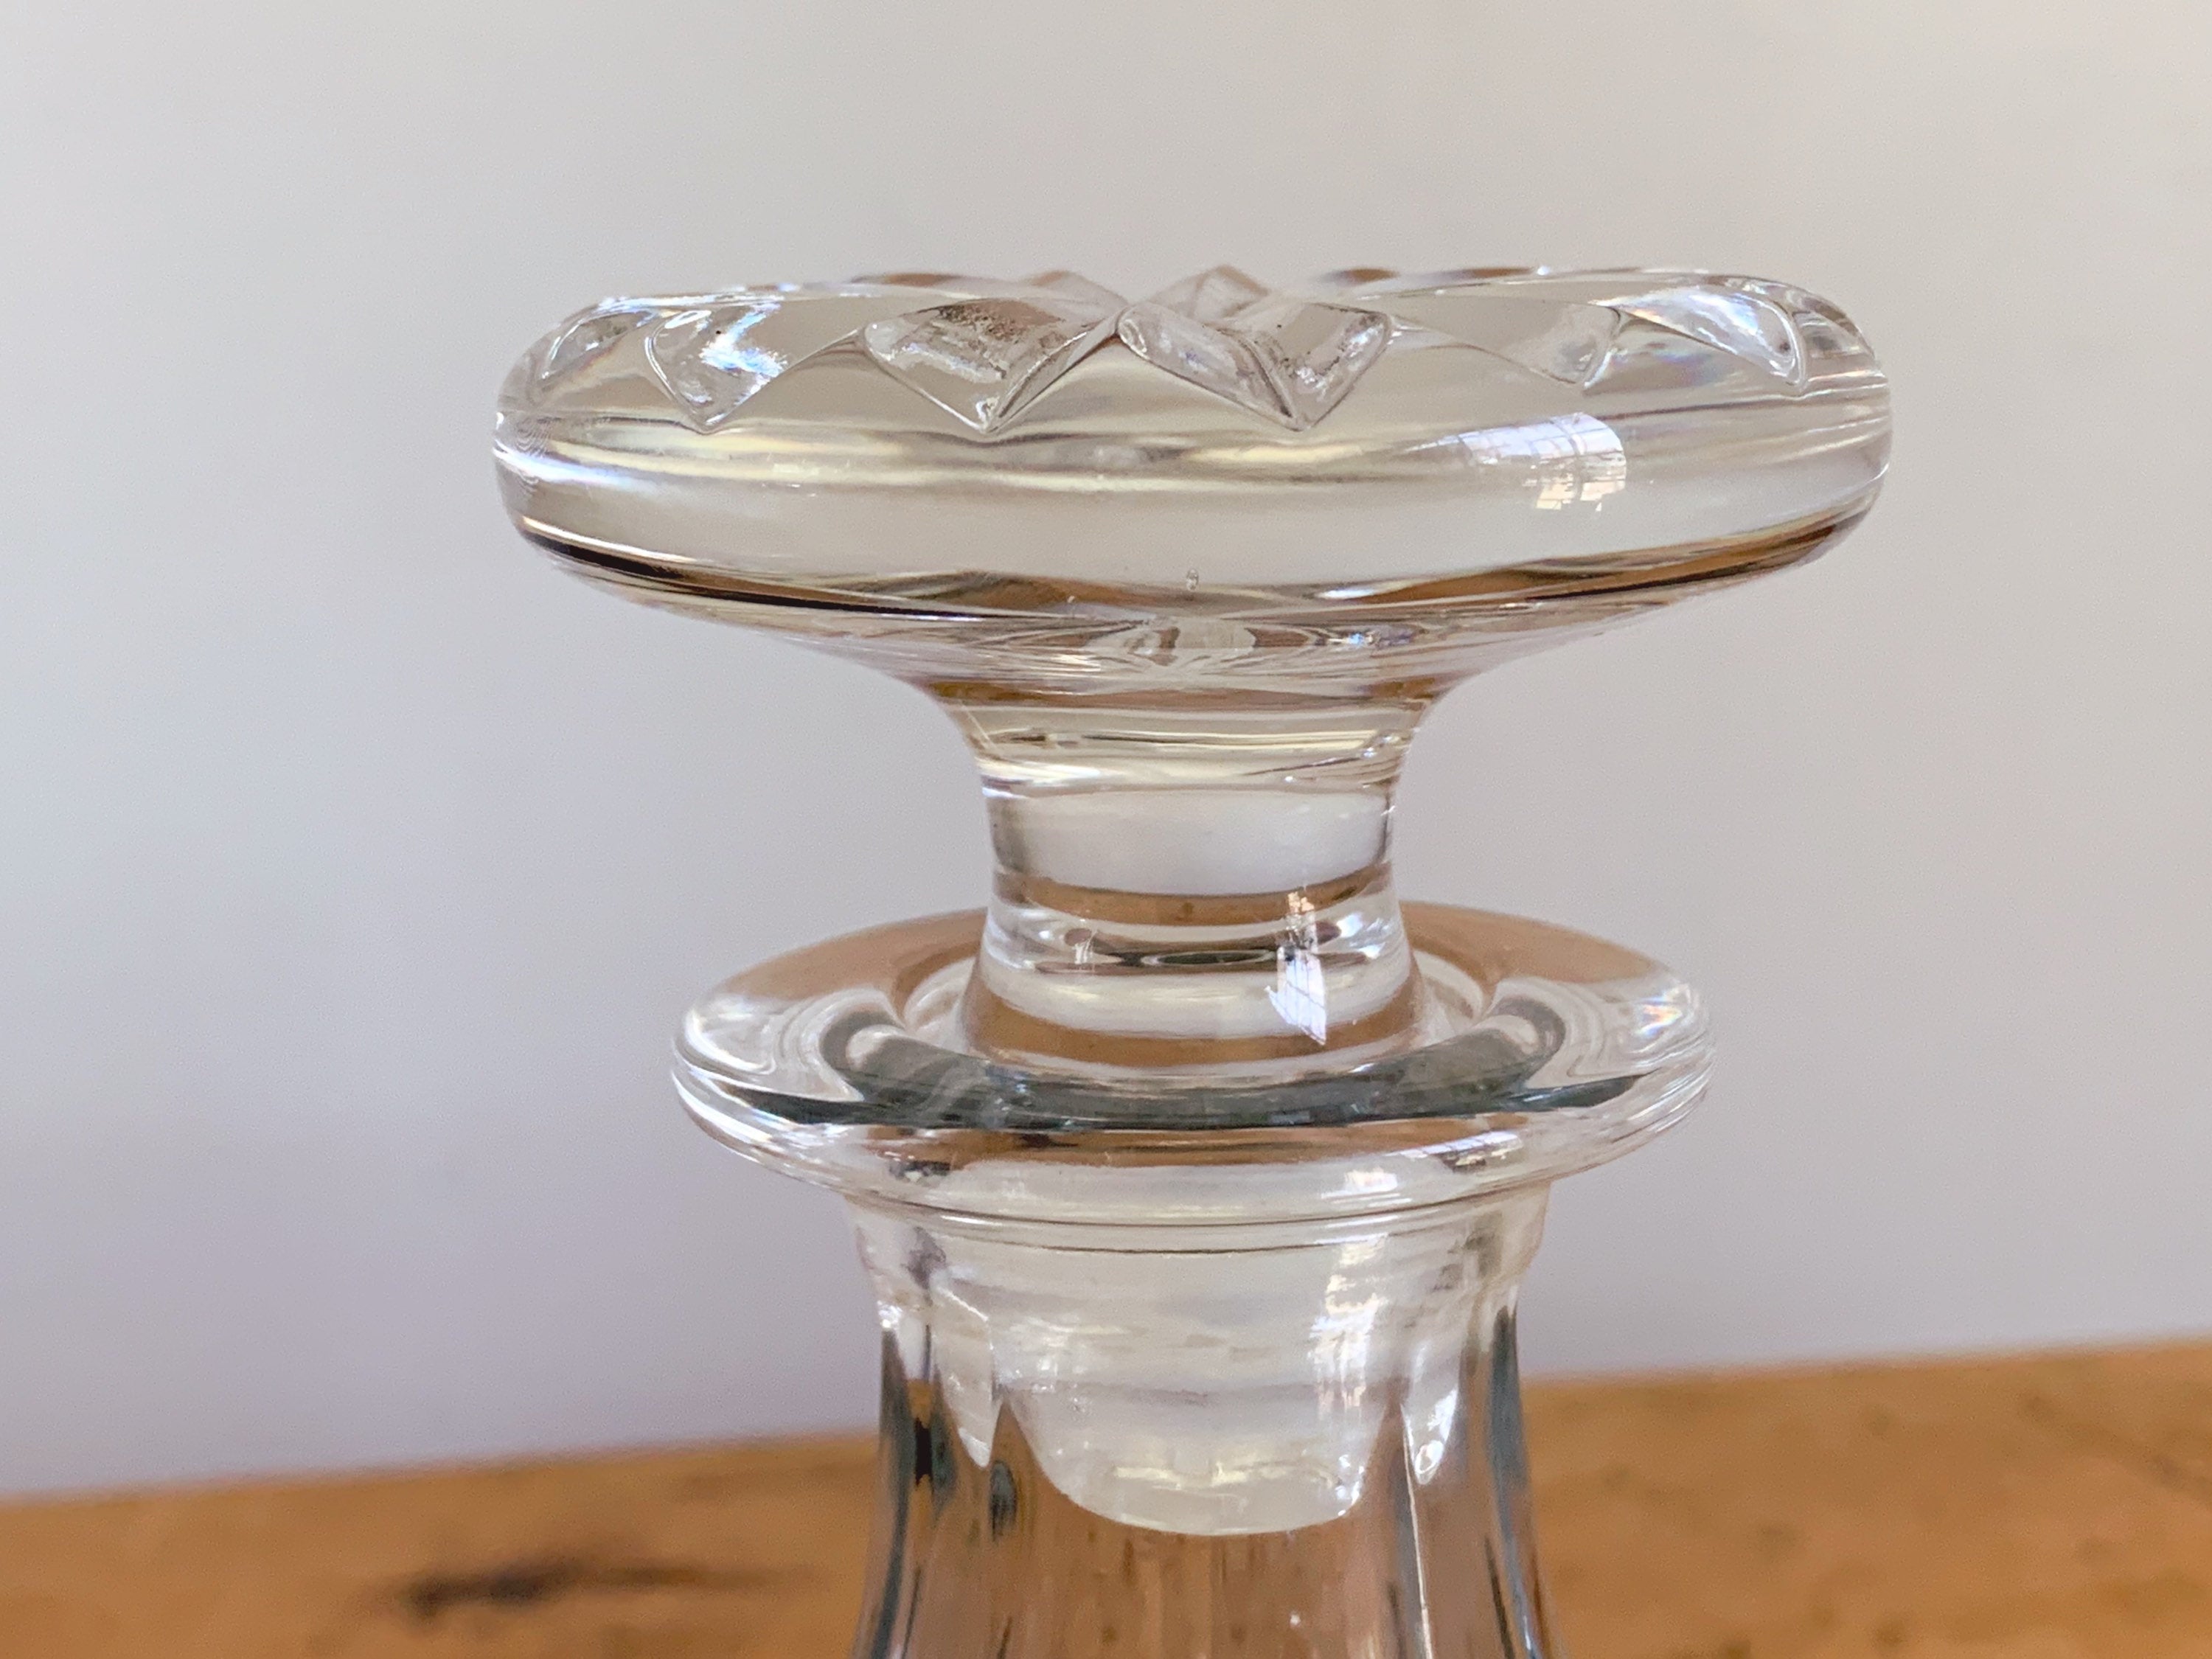 Vintage Brilliant Hand Blown and Cut Crystal Glass Decanter | Antique Barware Bar Cart Decor | Gift for Him Father's Day Gift